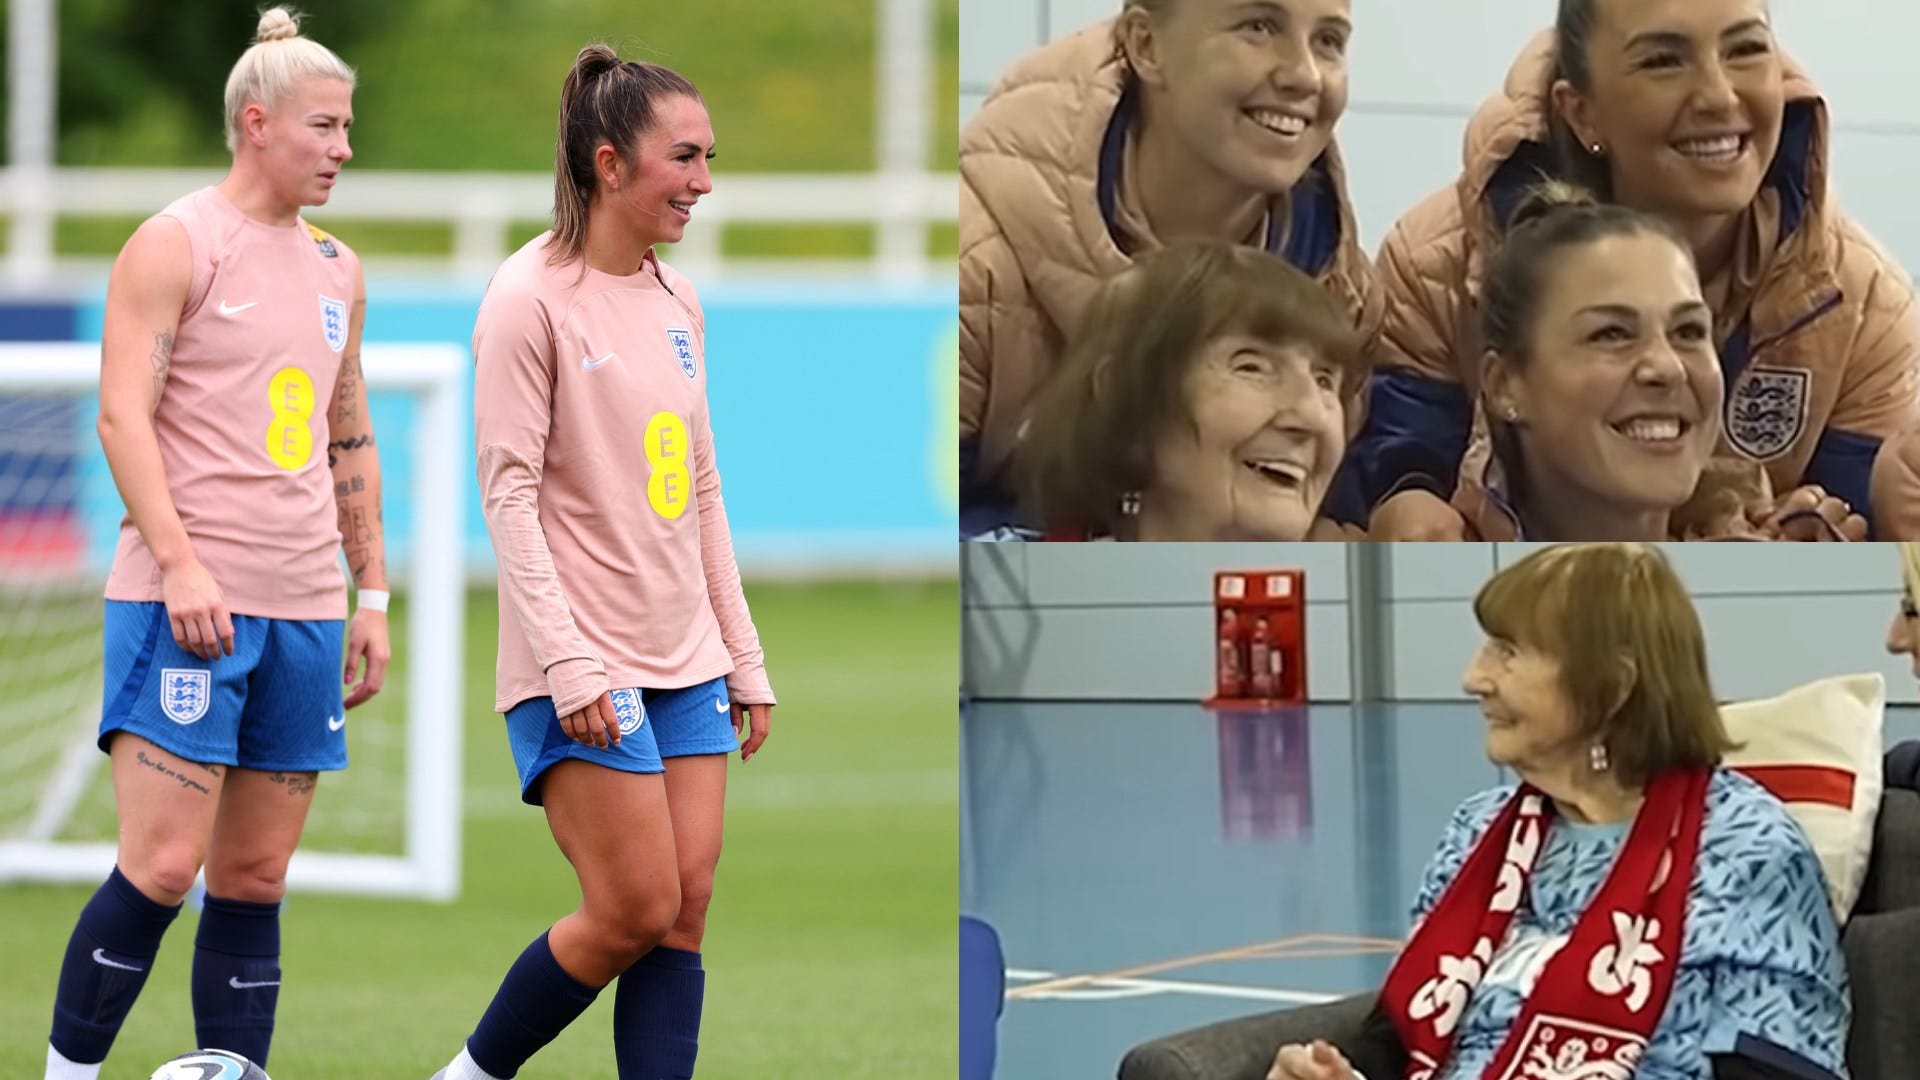 'Jitterbug!' - England squad sit down with 100-year-old fan who went viral for heartwarming reaction to receiving her first-ever Lionesses shirt - and Katie Zelem suggests TikTok dance collaboration